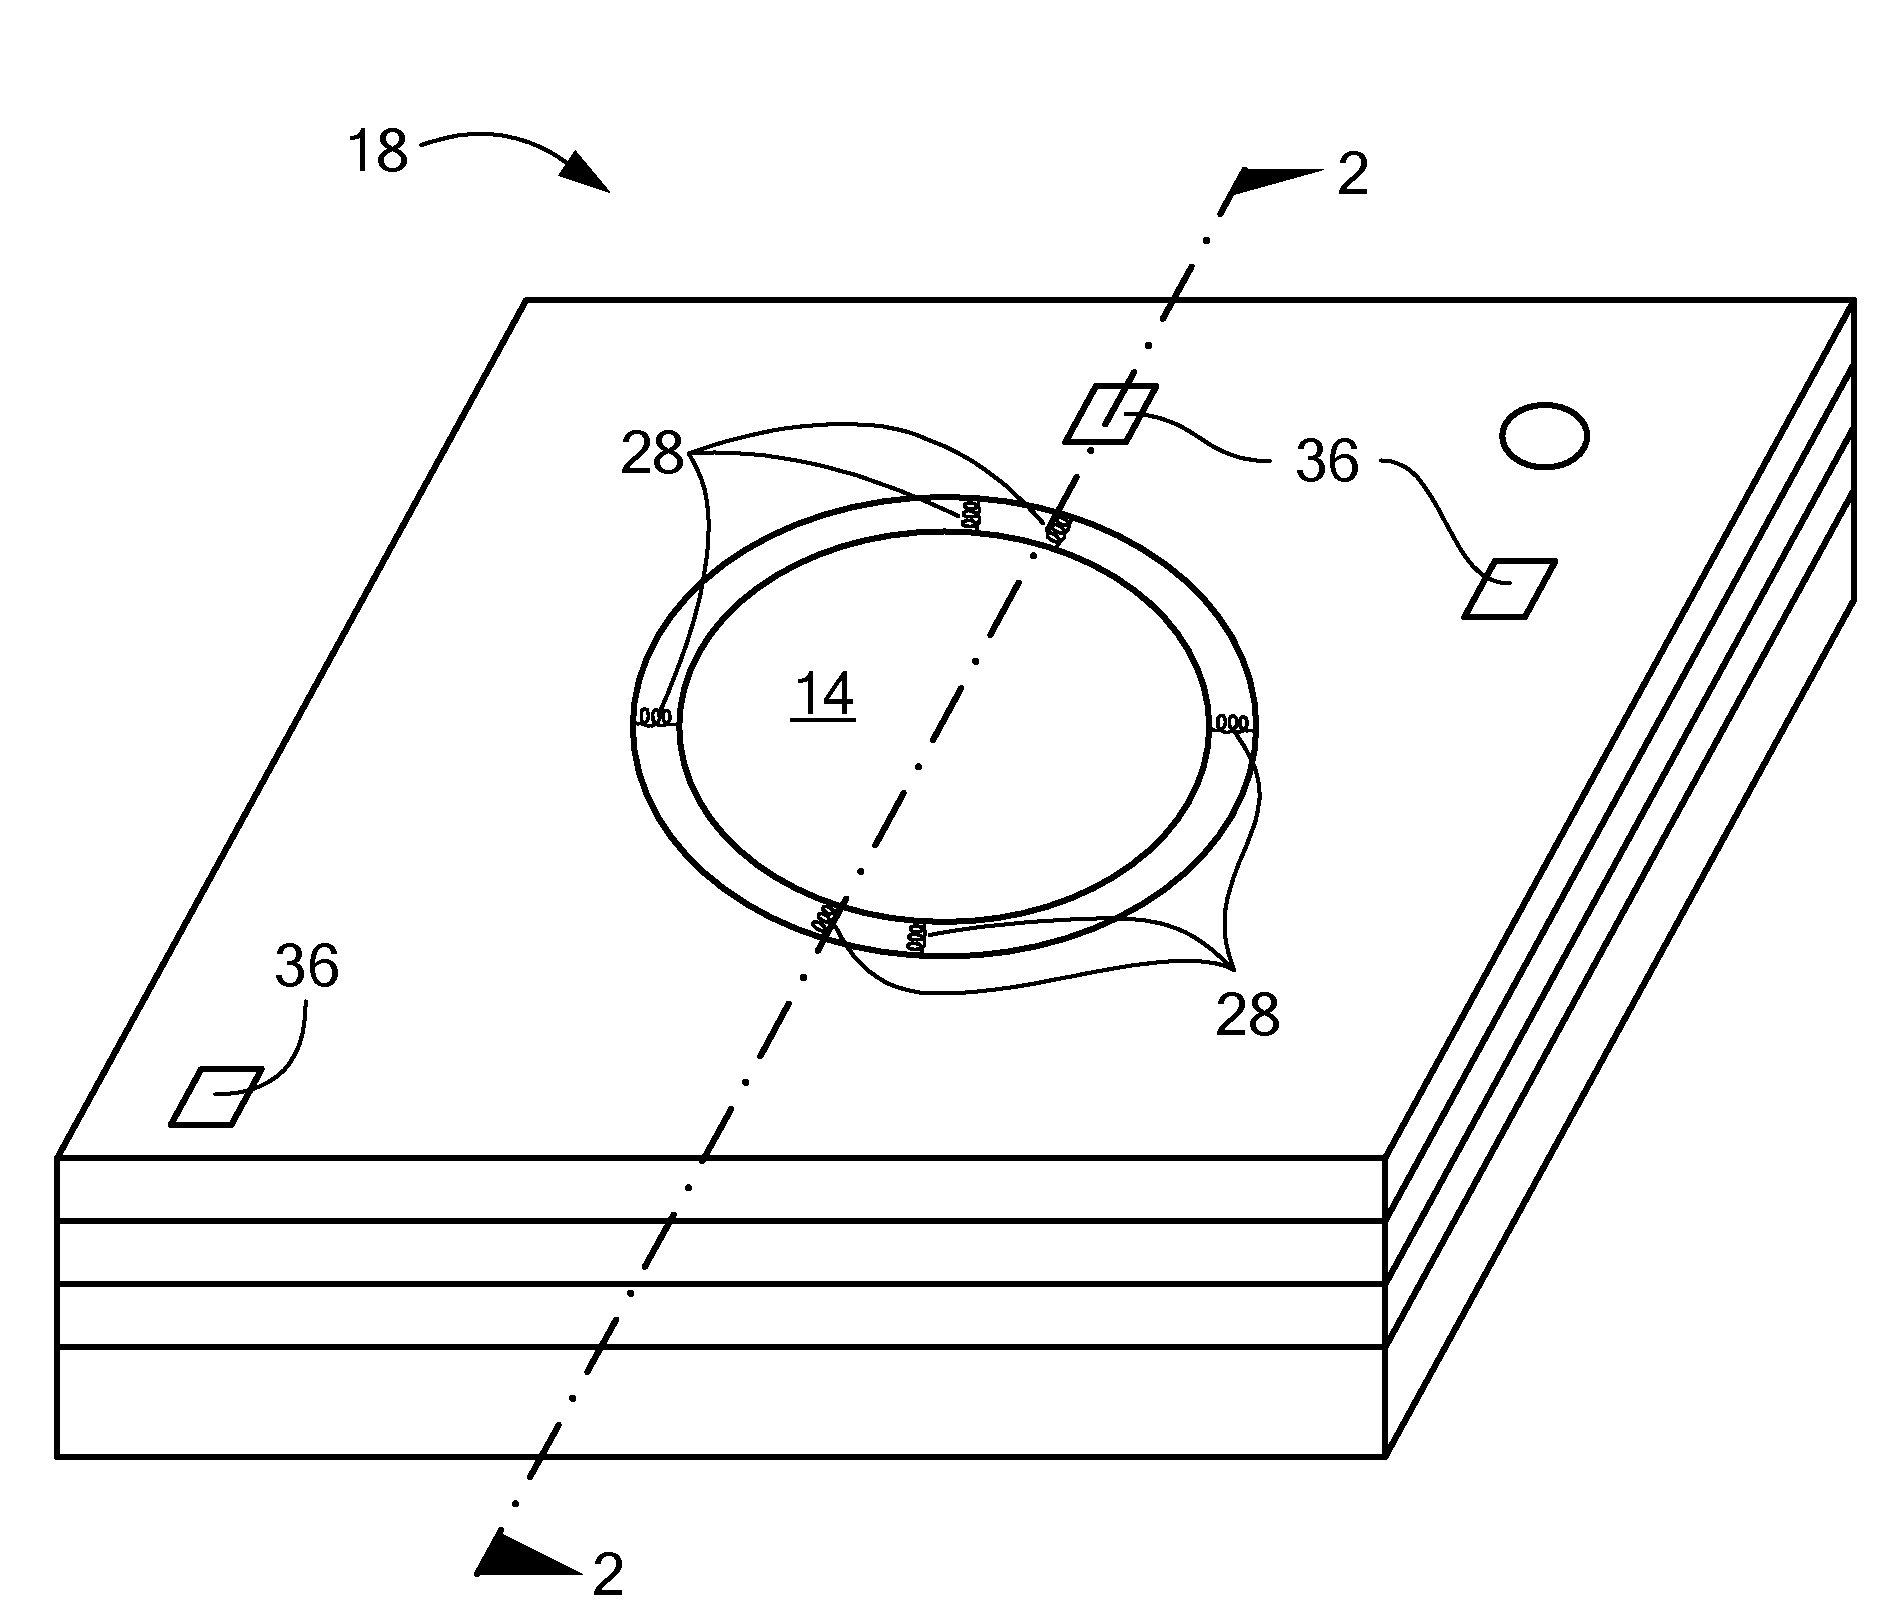 Microphone with Aligned Apertures